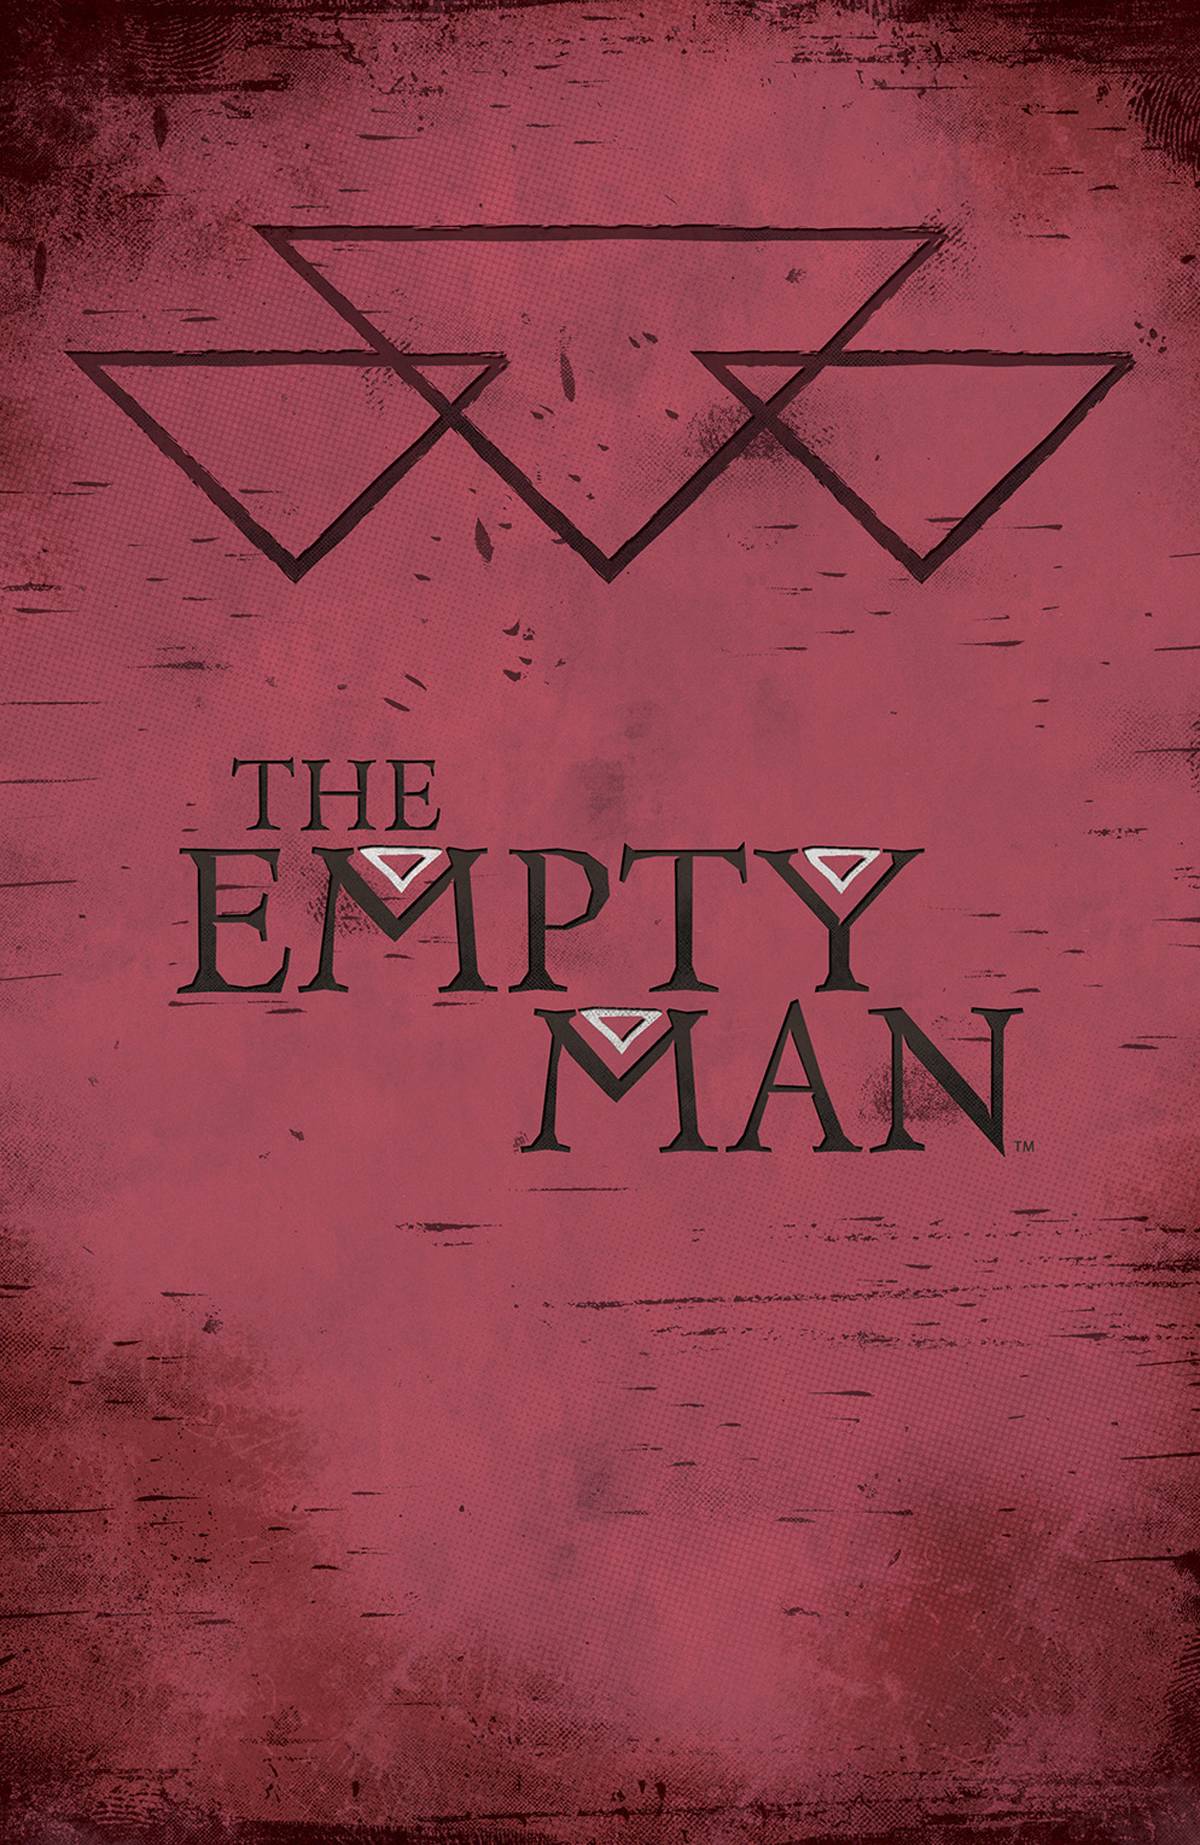 The Empty Man - Where to download or stream?
